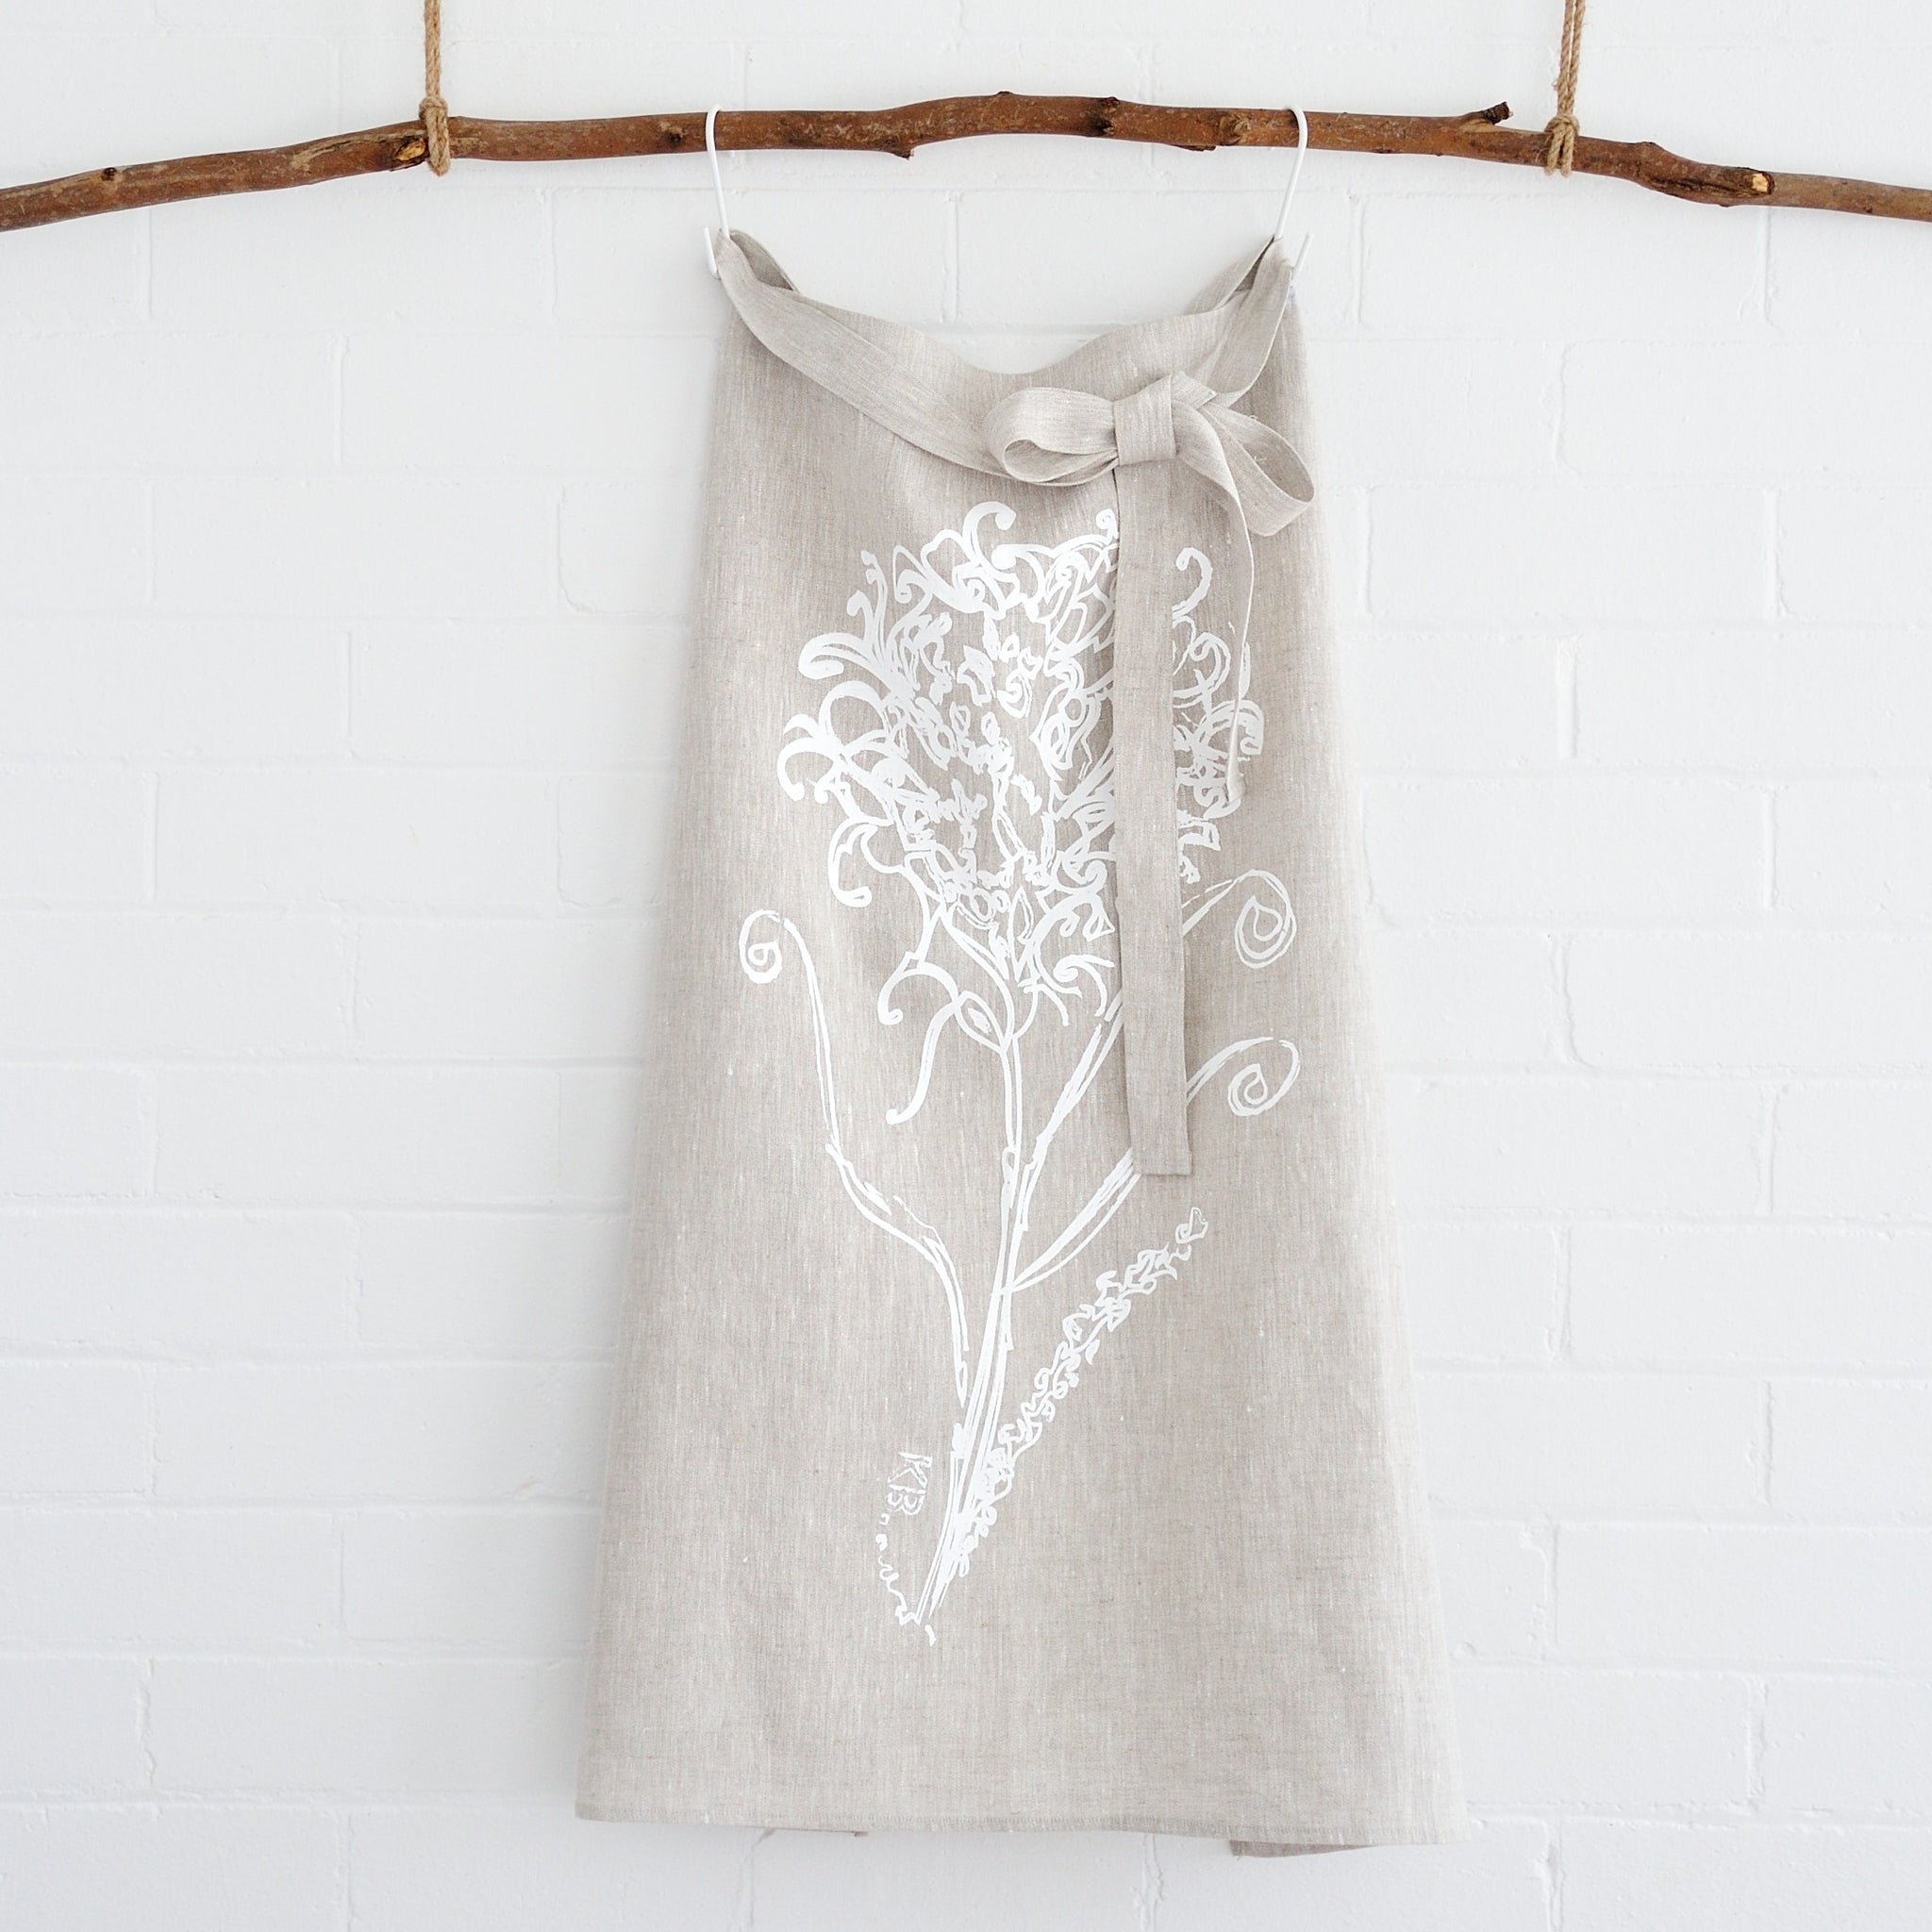 100% linen hand screen printed white waratah cafe style apron by Krystol Brailey Designs